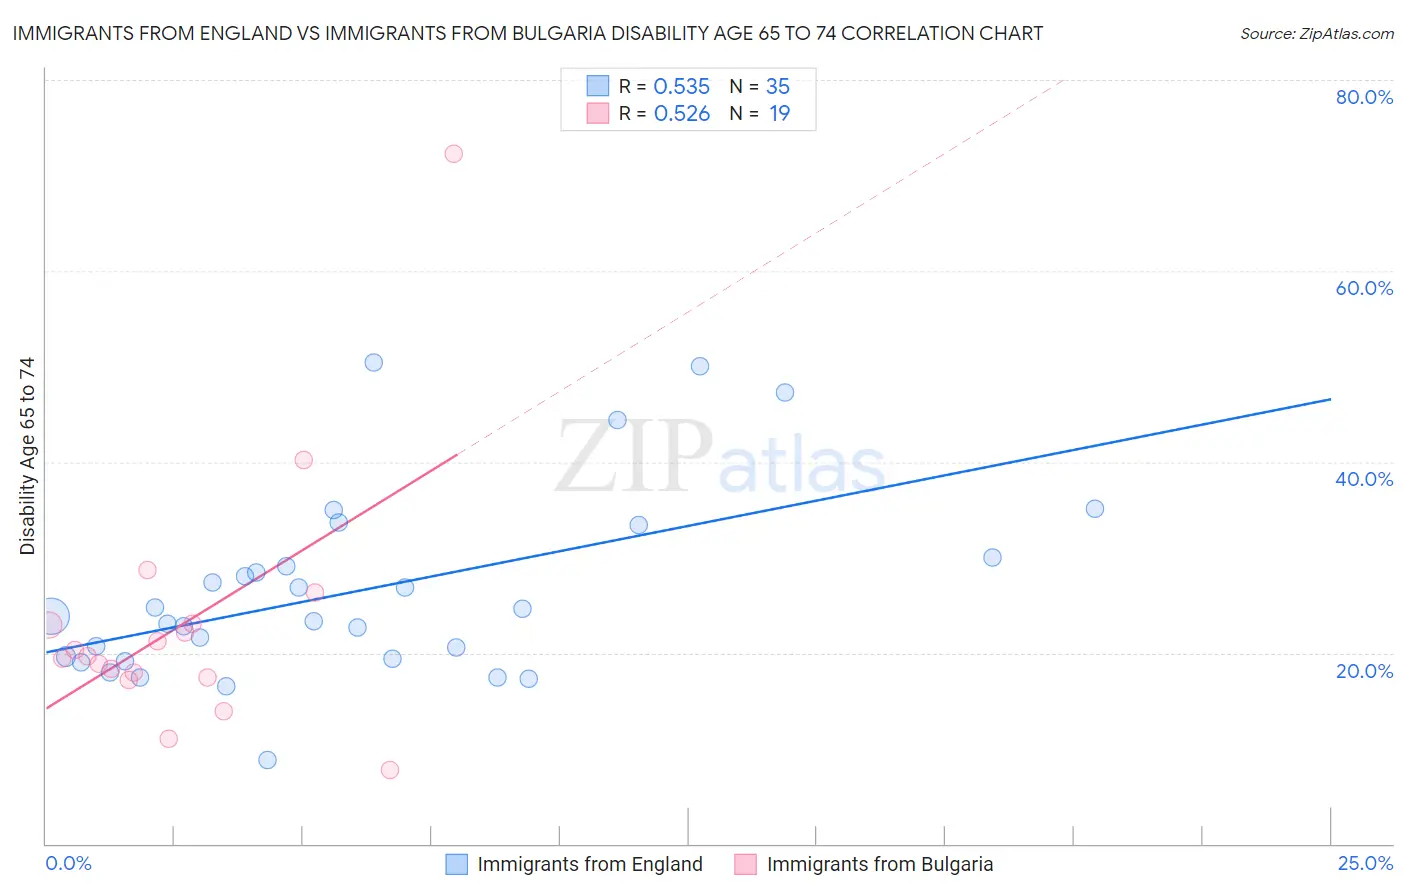 Immigrants from England vs Immigrants from Bulgaria Disability Age 65 to 74